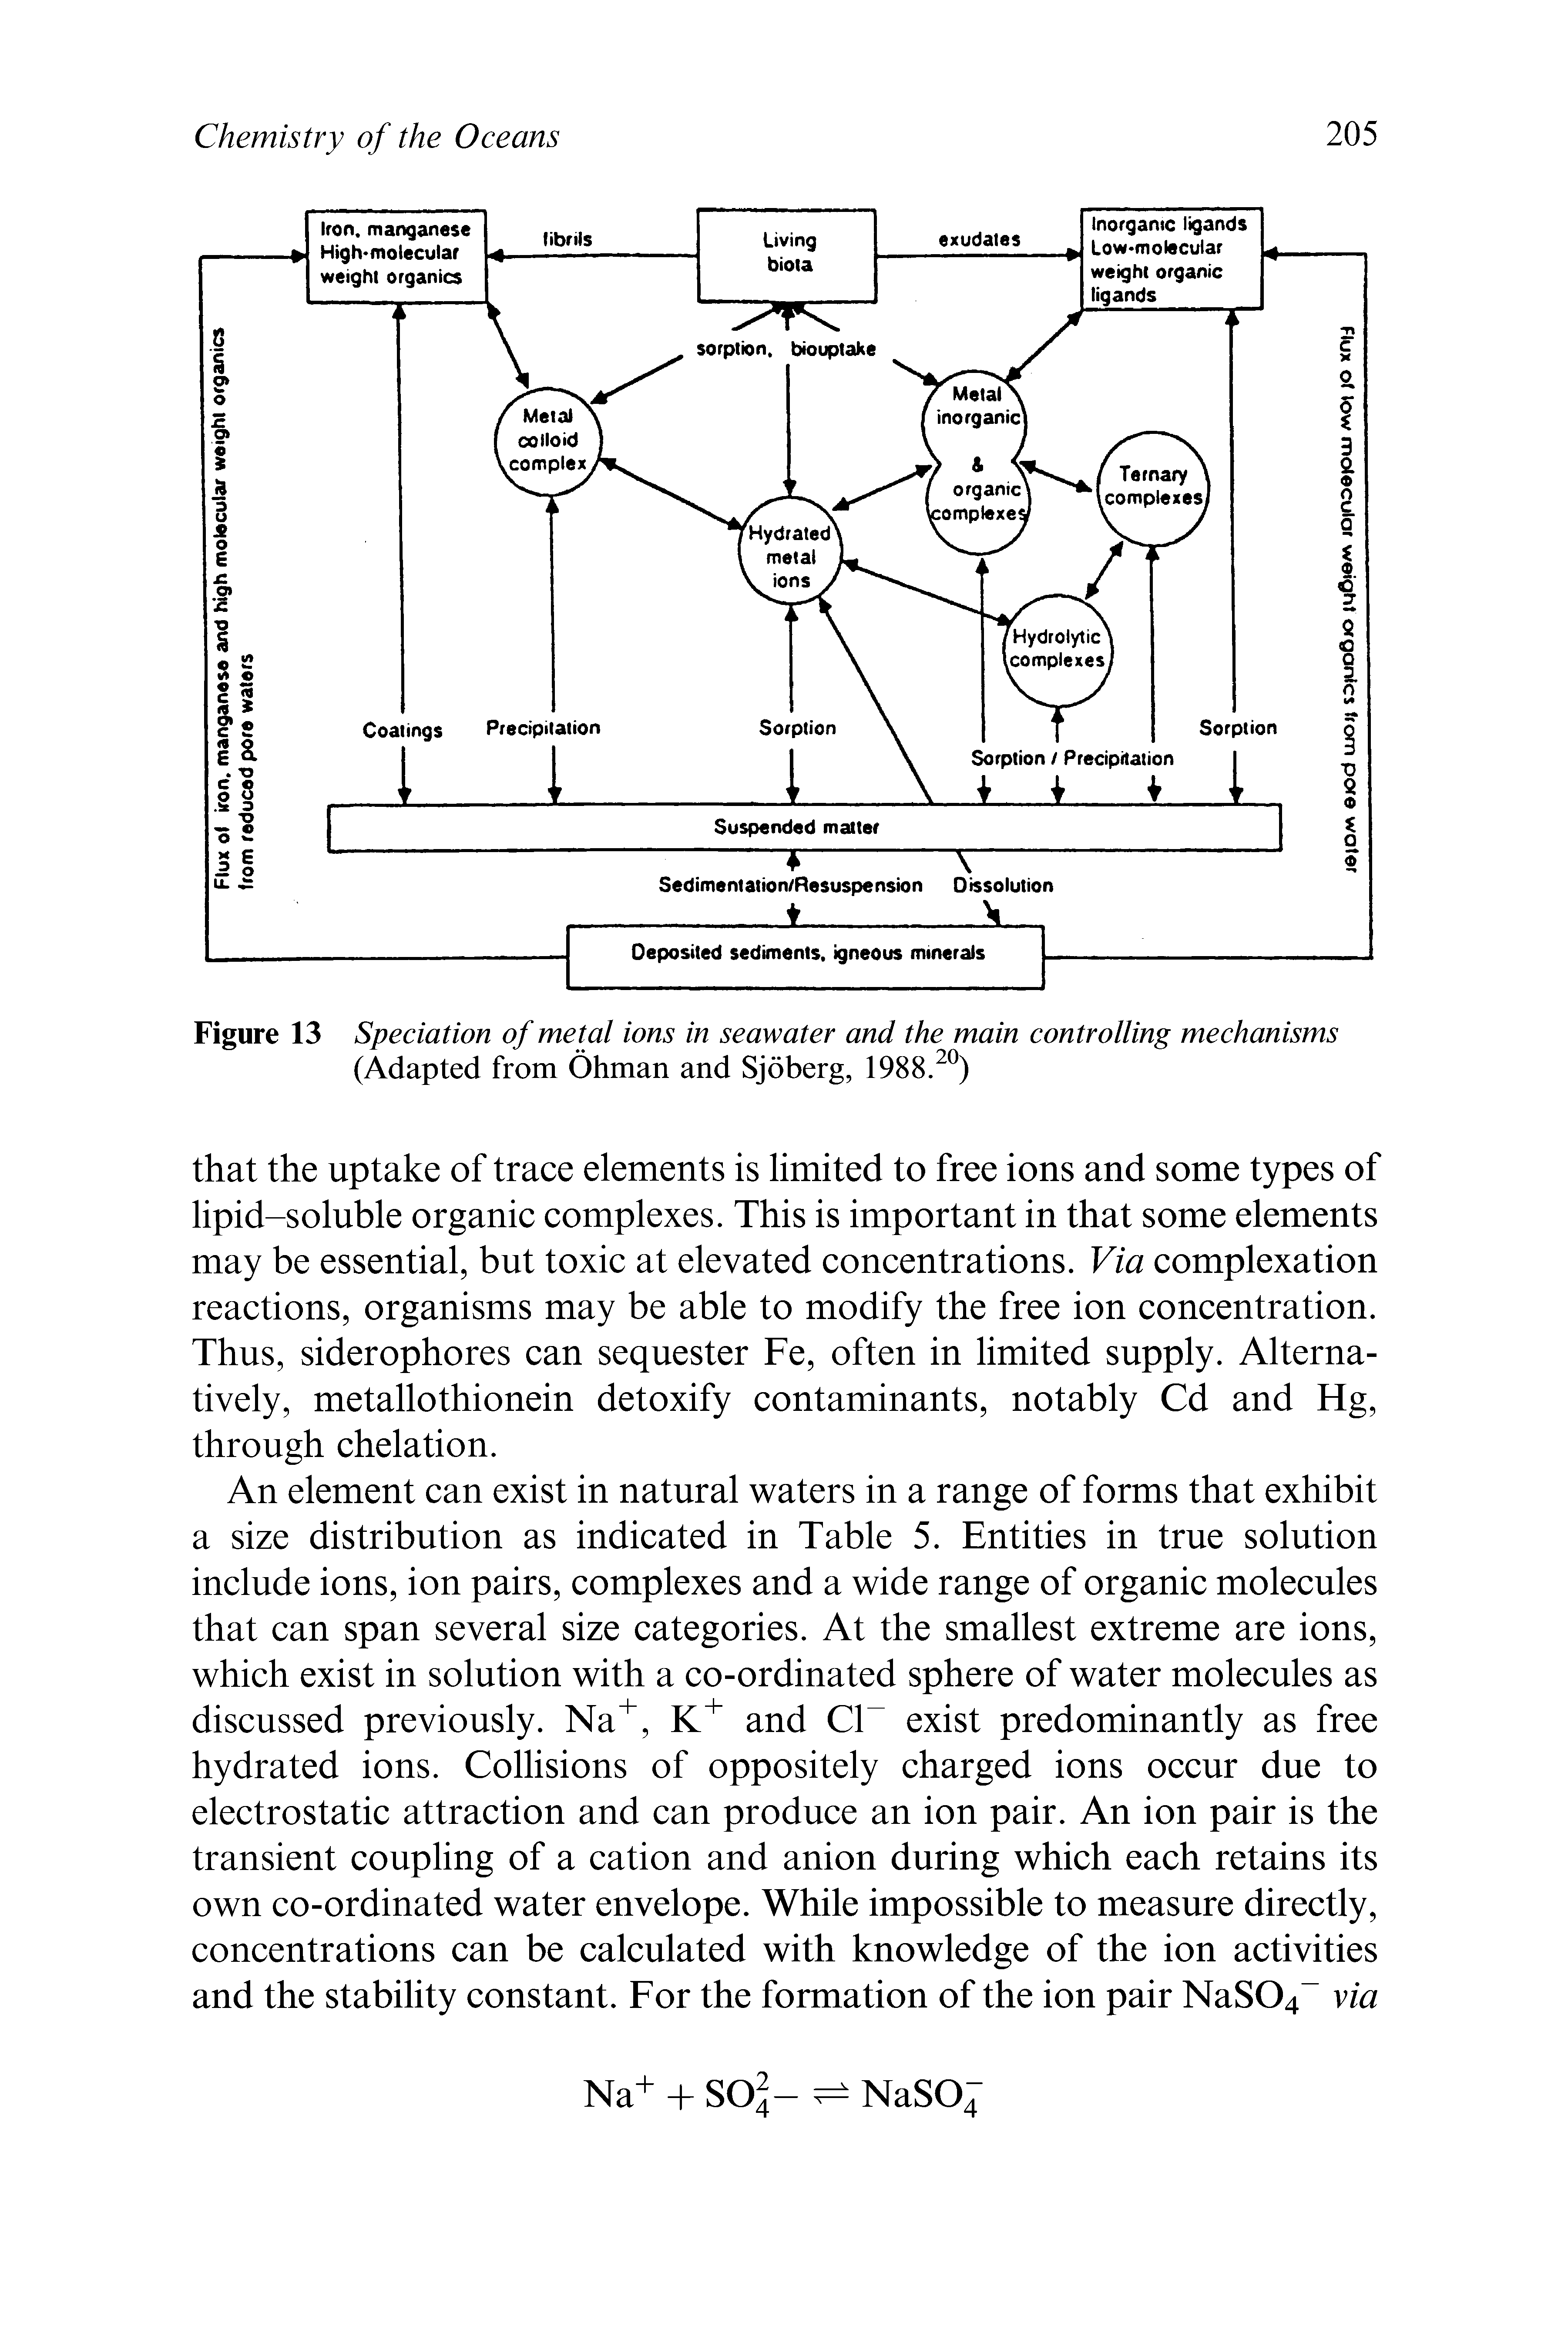 Figure 13 Speciation of metal ions in seawater and the main controlling mechanisms (Adapted from Ohman and Sjoberg, 1988. )...